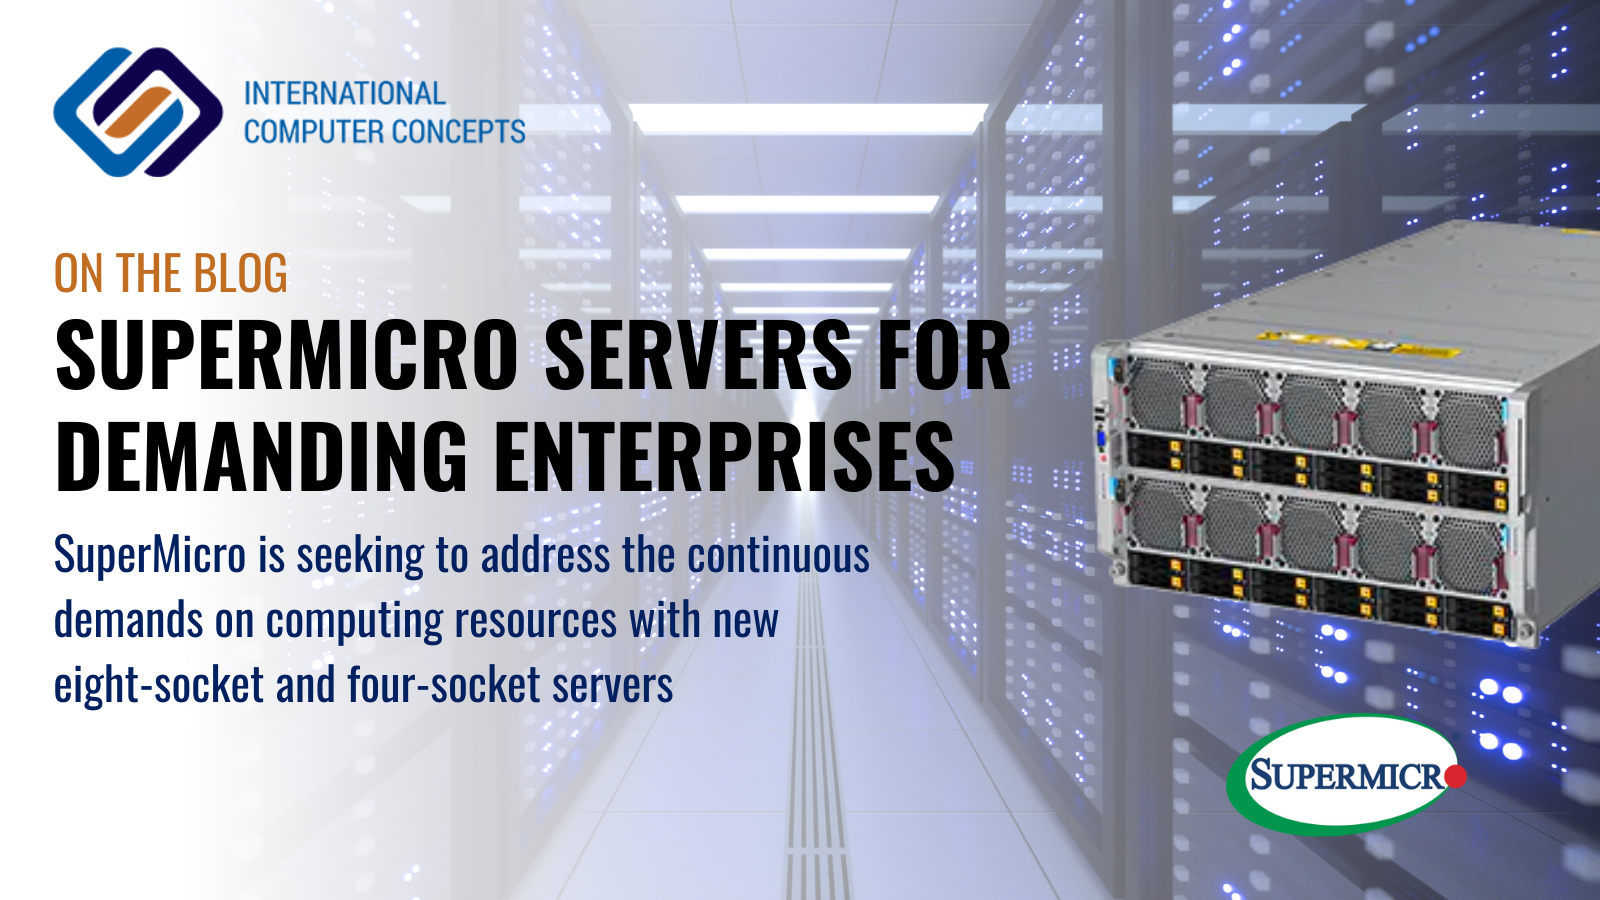 SuperMicro releases Eight-socket and Four-socket servers for the most demanding Enterprise workloads 